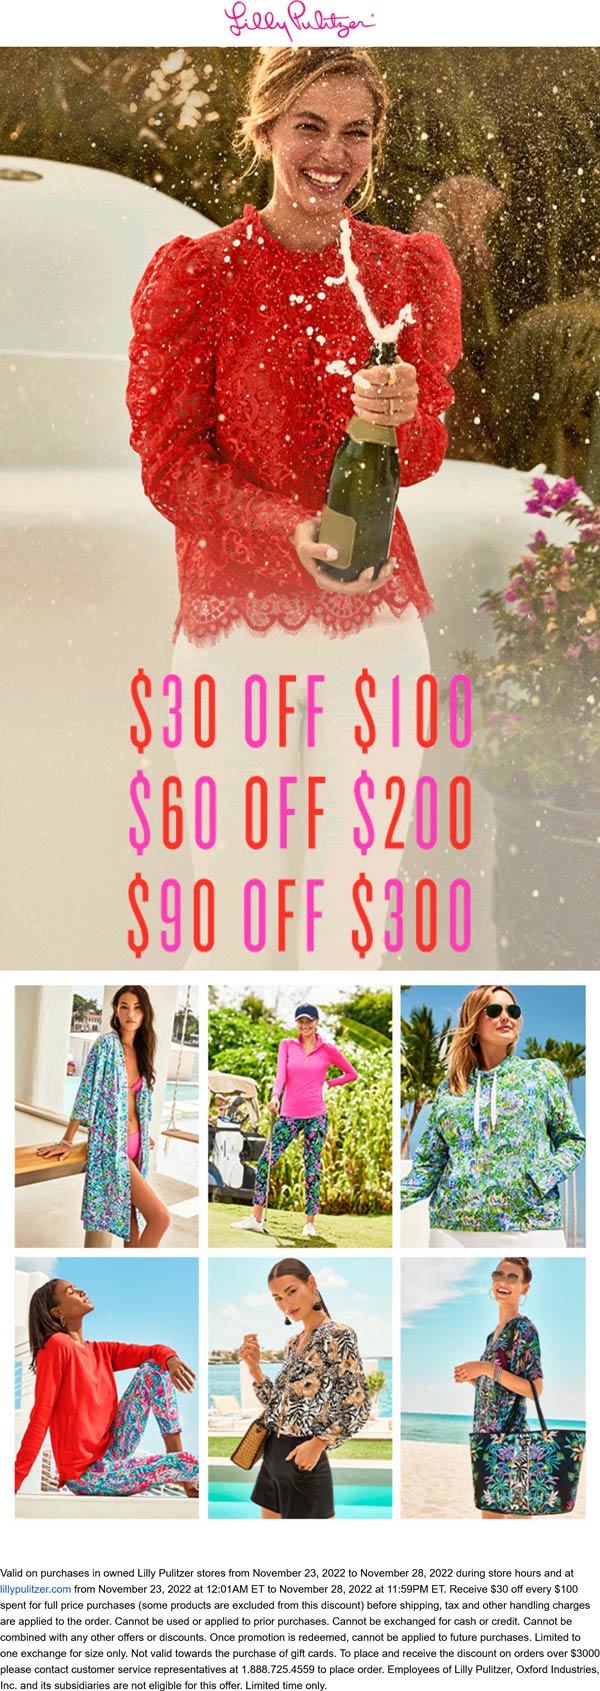 Lilly Pulitzer stores Coupon  $30 off every $100 at Lilly Pulitzer, ditto online #lillypulitzer 